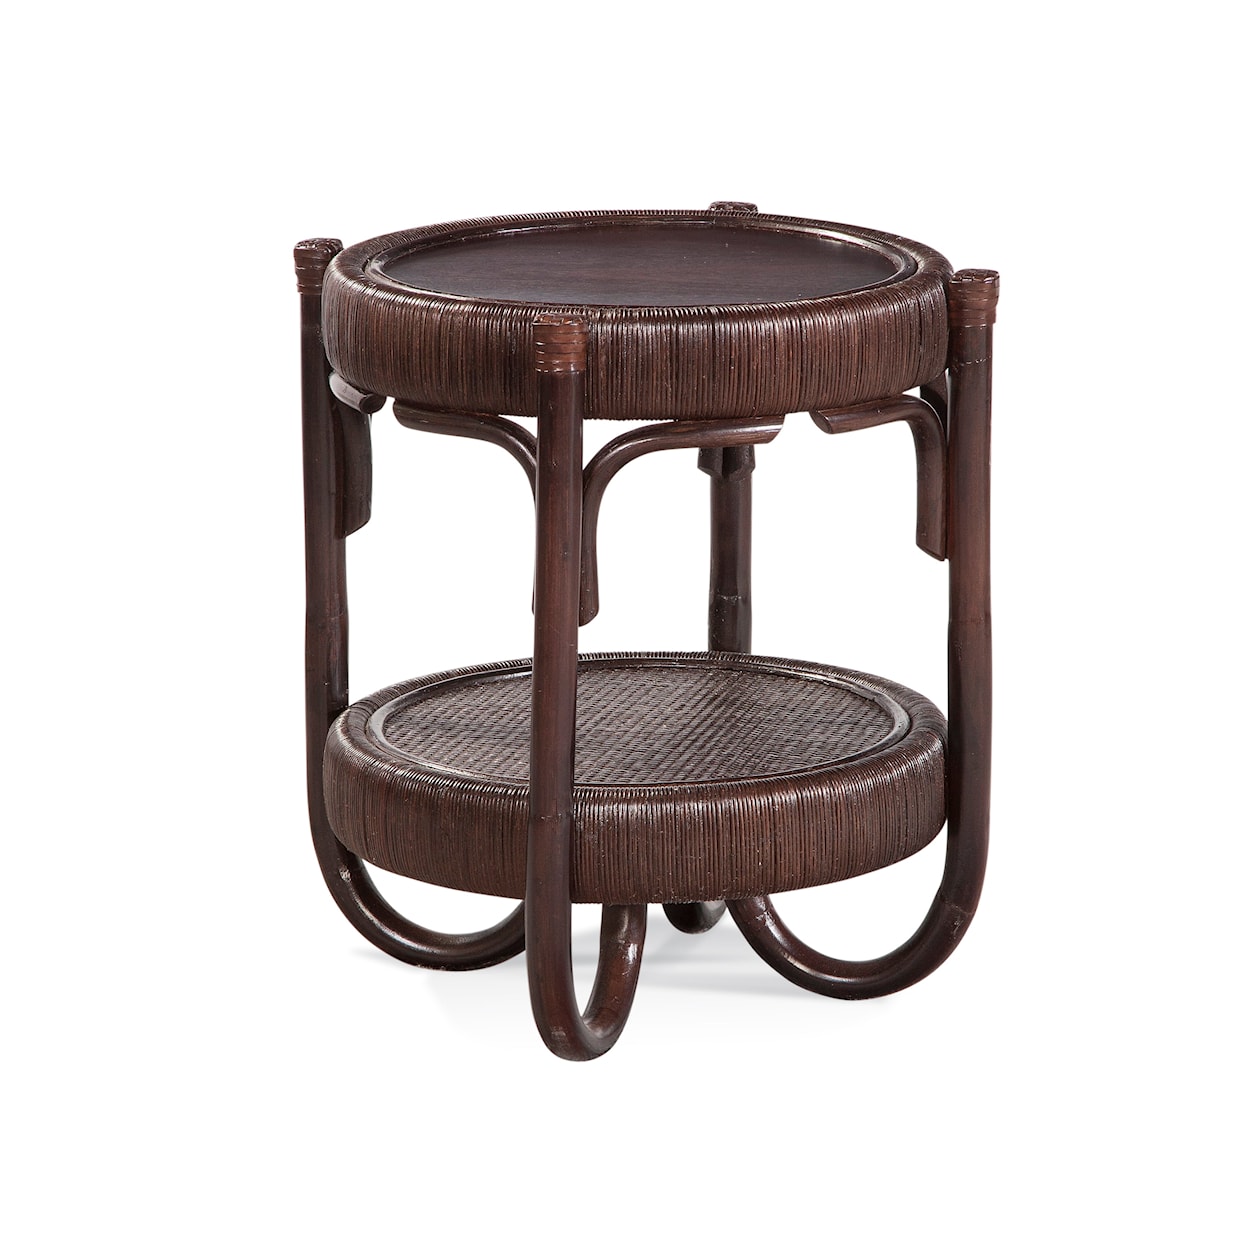 Braxton Culler Willow Creek Chairside Table